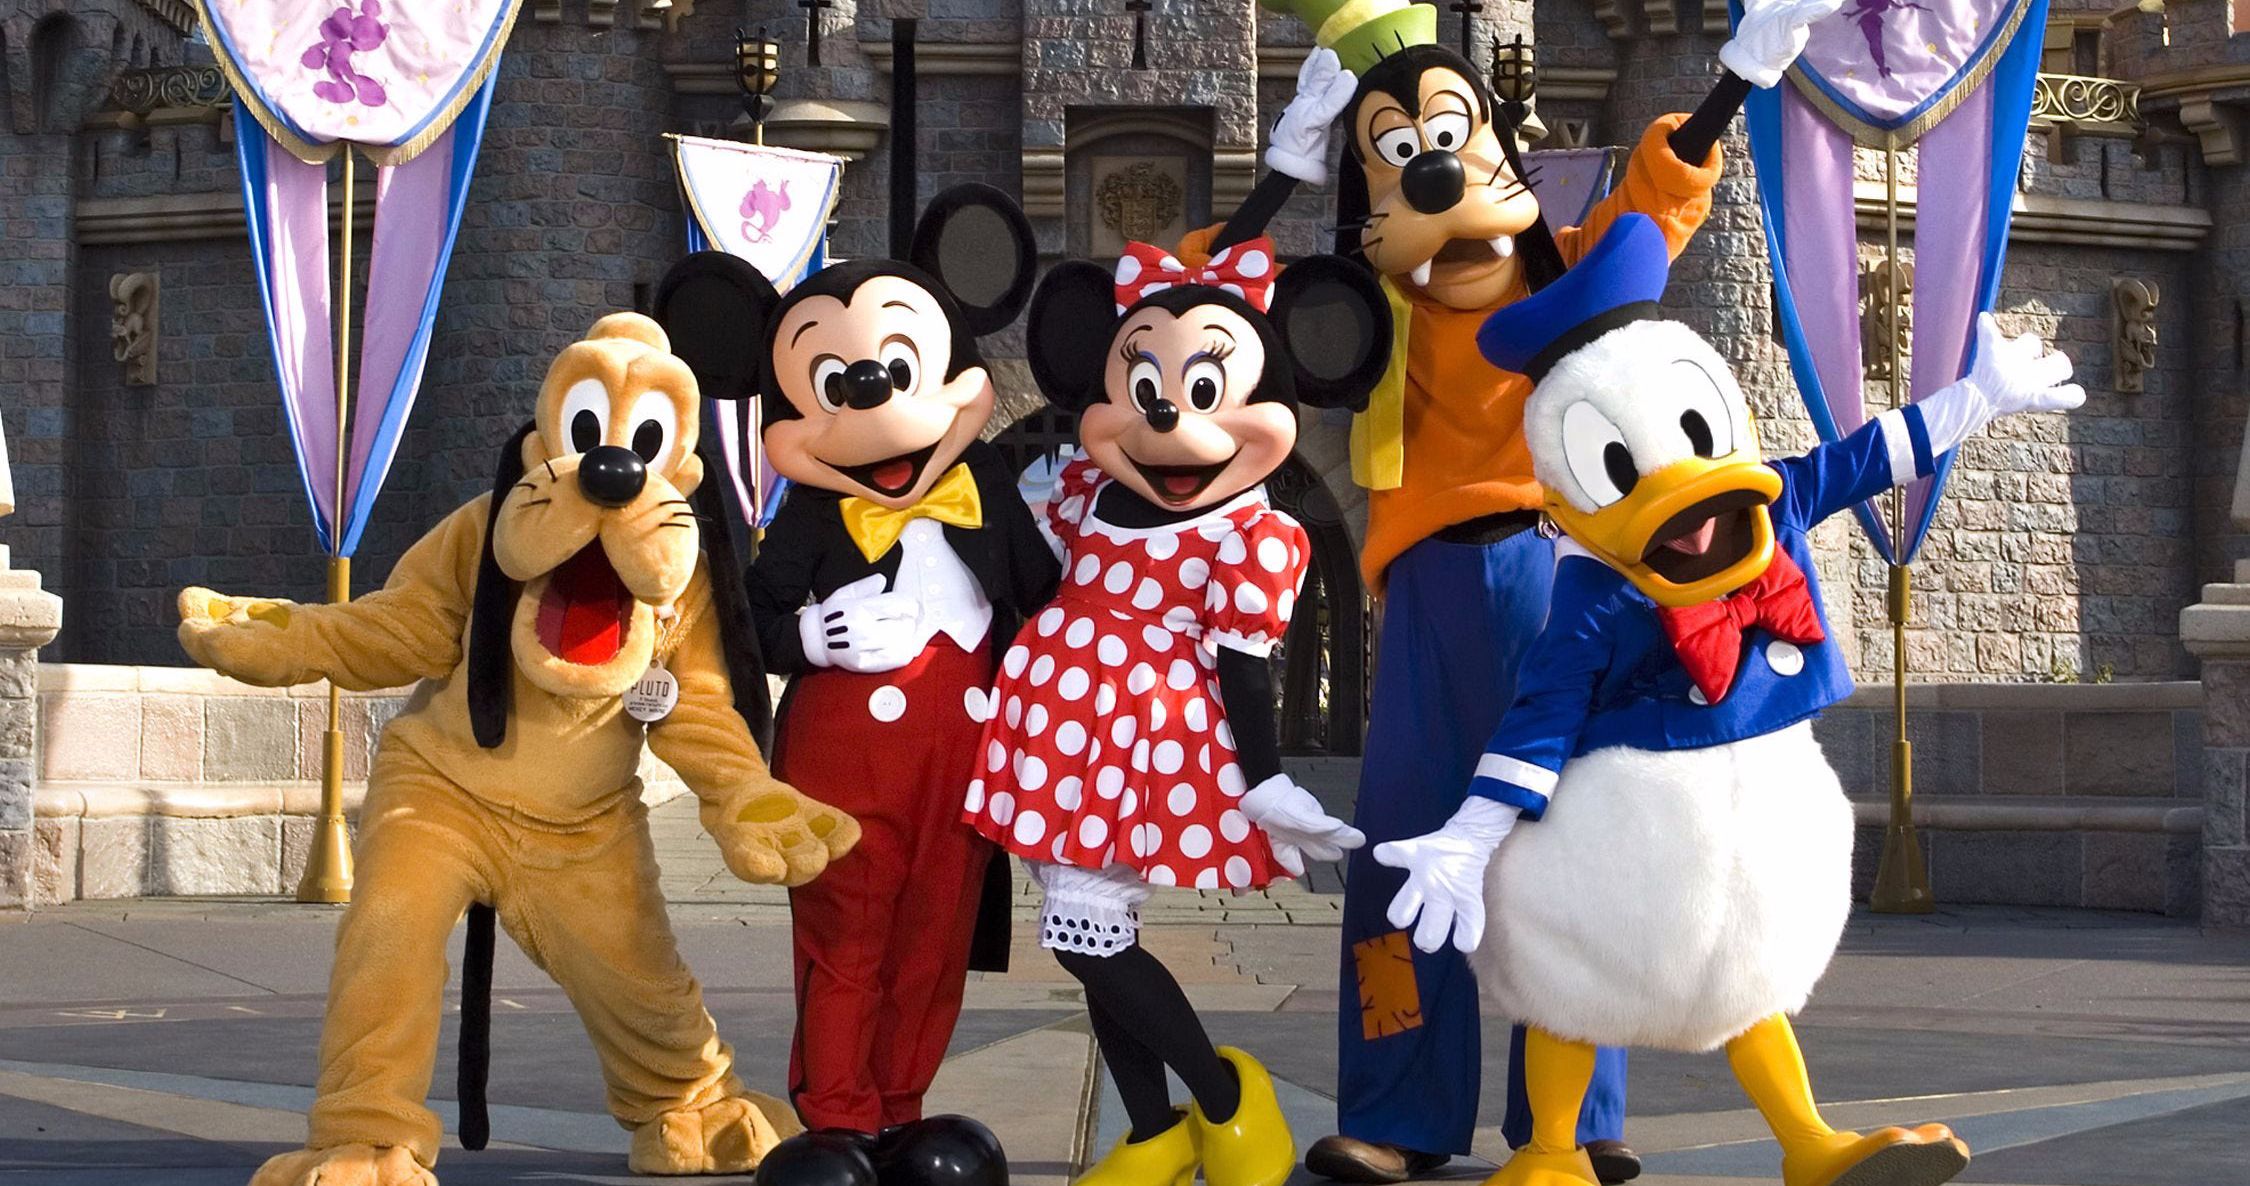 Disneyland Is Ready to Reopen &amp; Actively Working with California Governor to Make It Happen